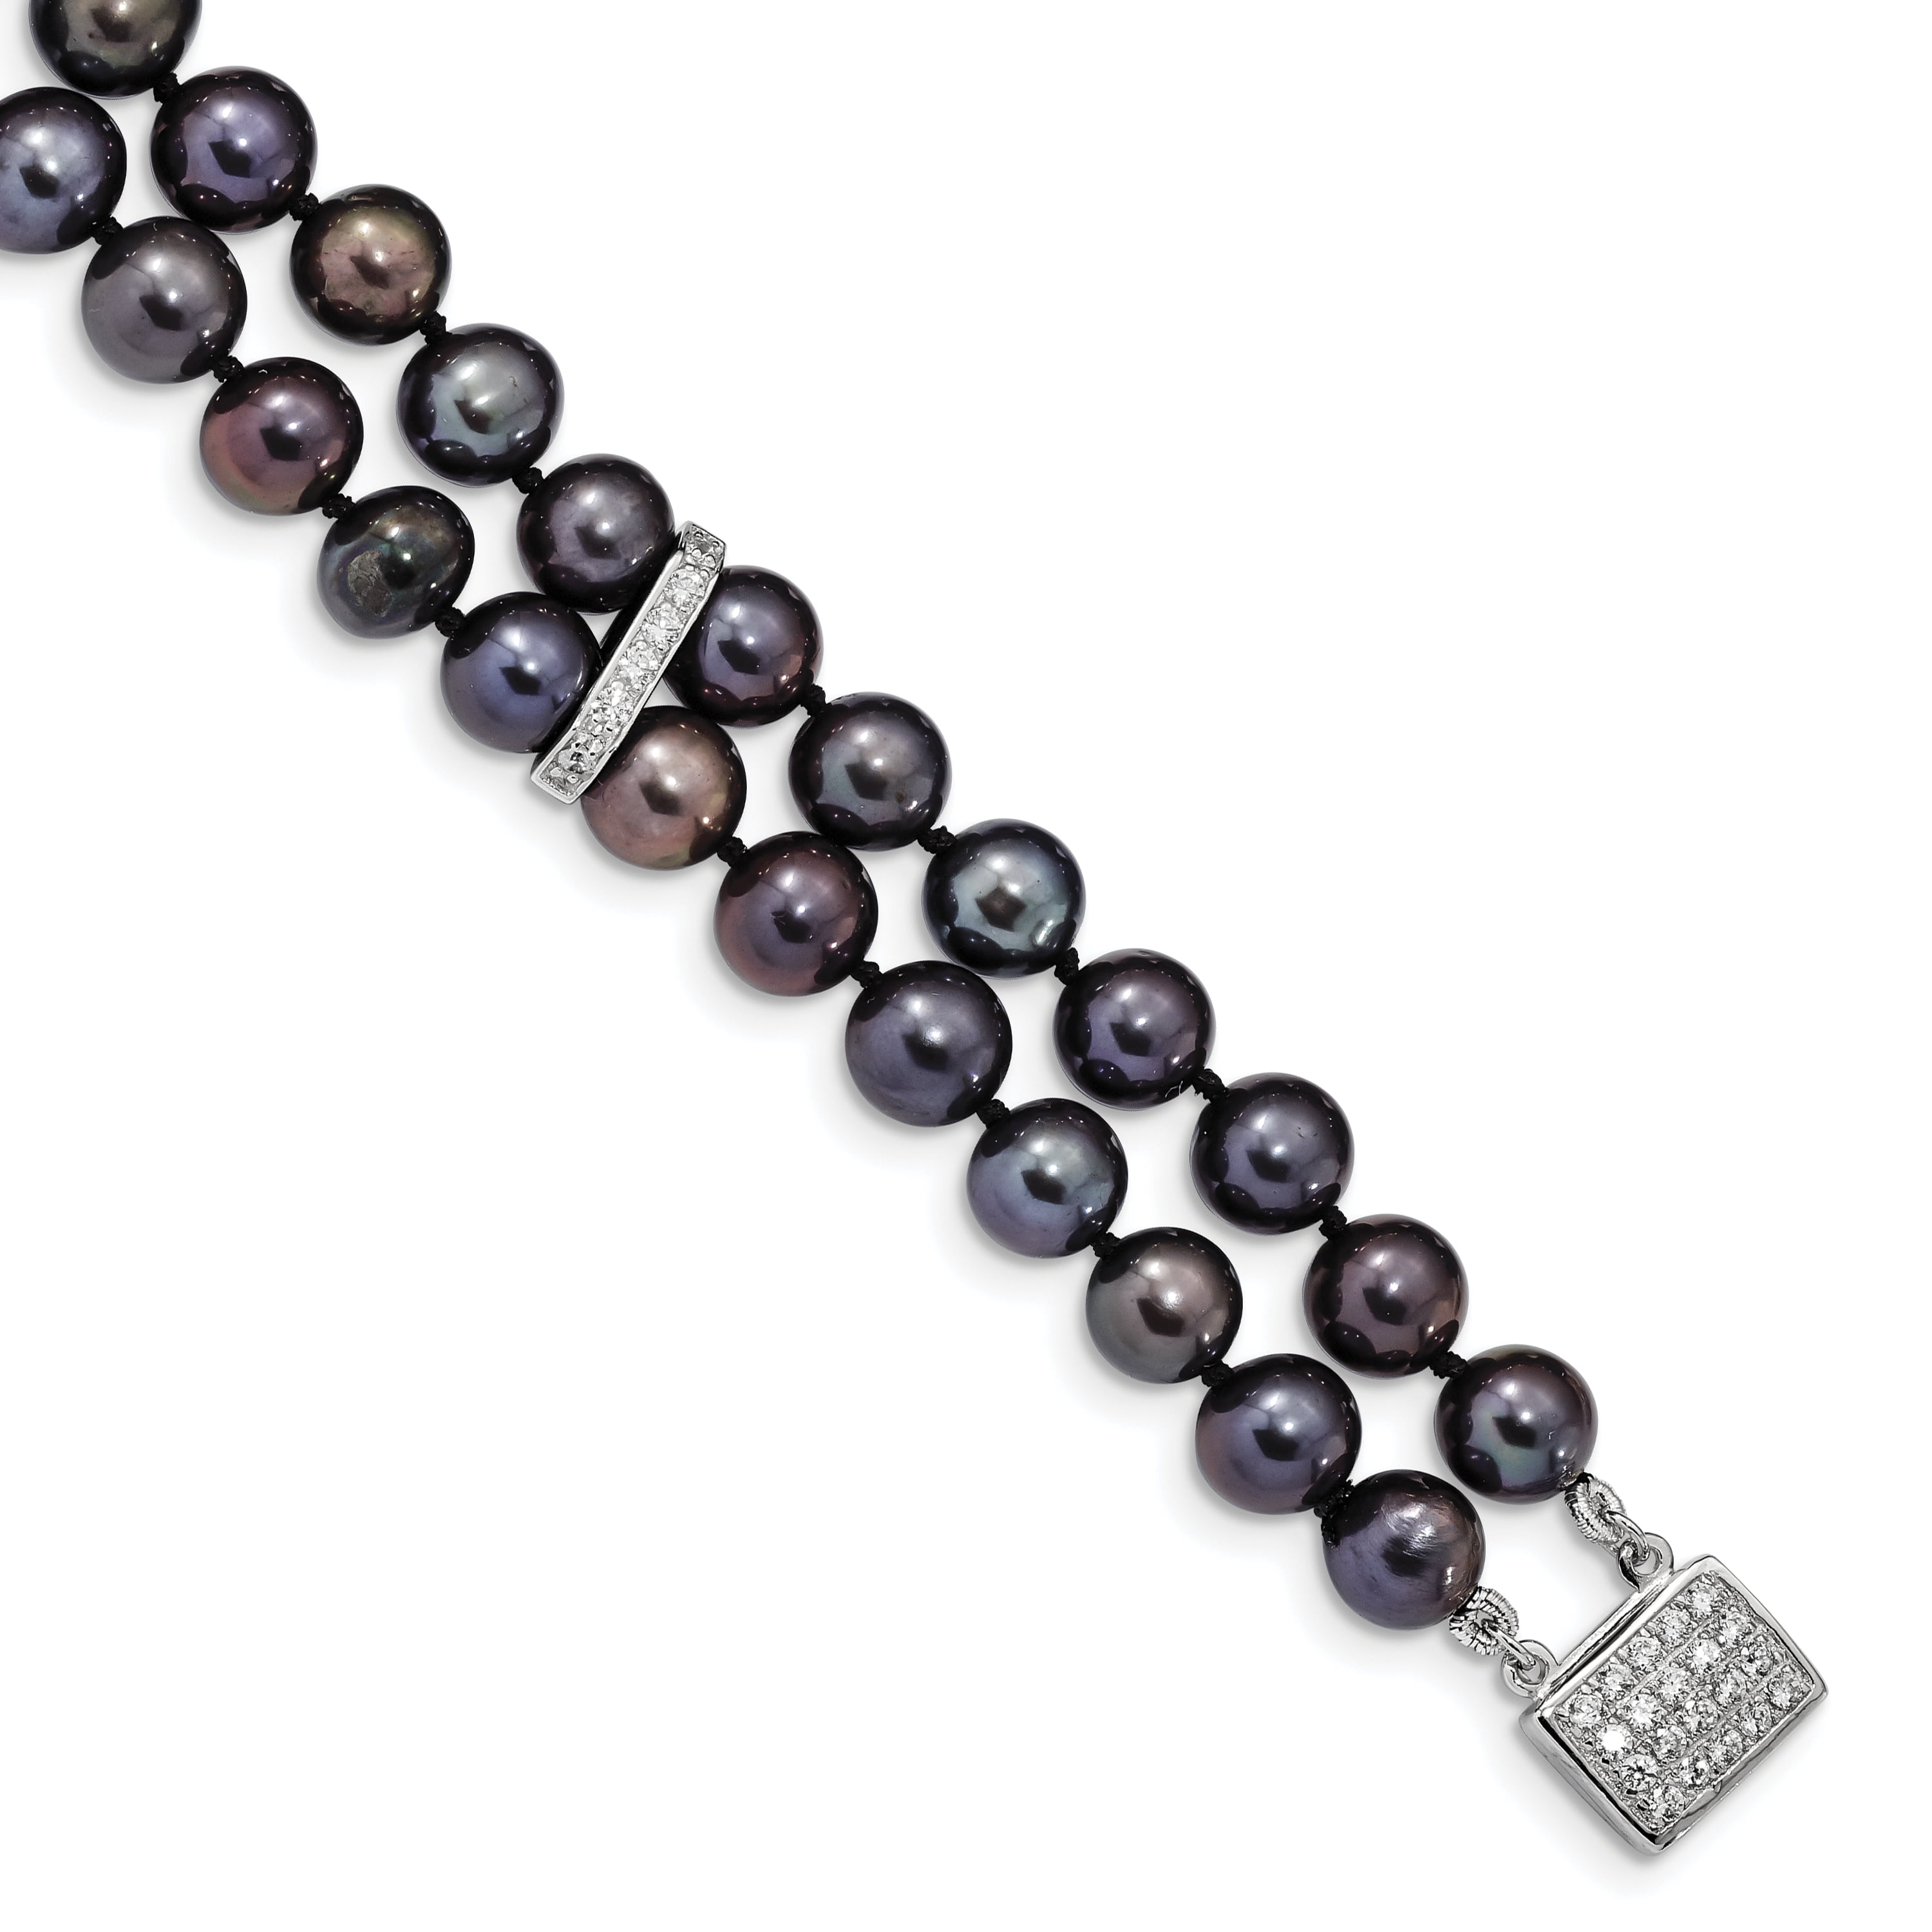 Solid Sterling Silver Rhodium Plated 8 Millimeter Dyed Black Freshwater Cultured Pearl Necklace